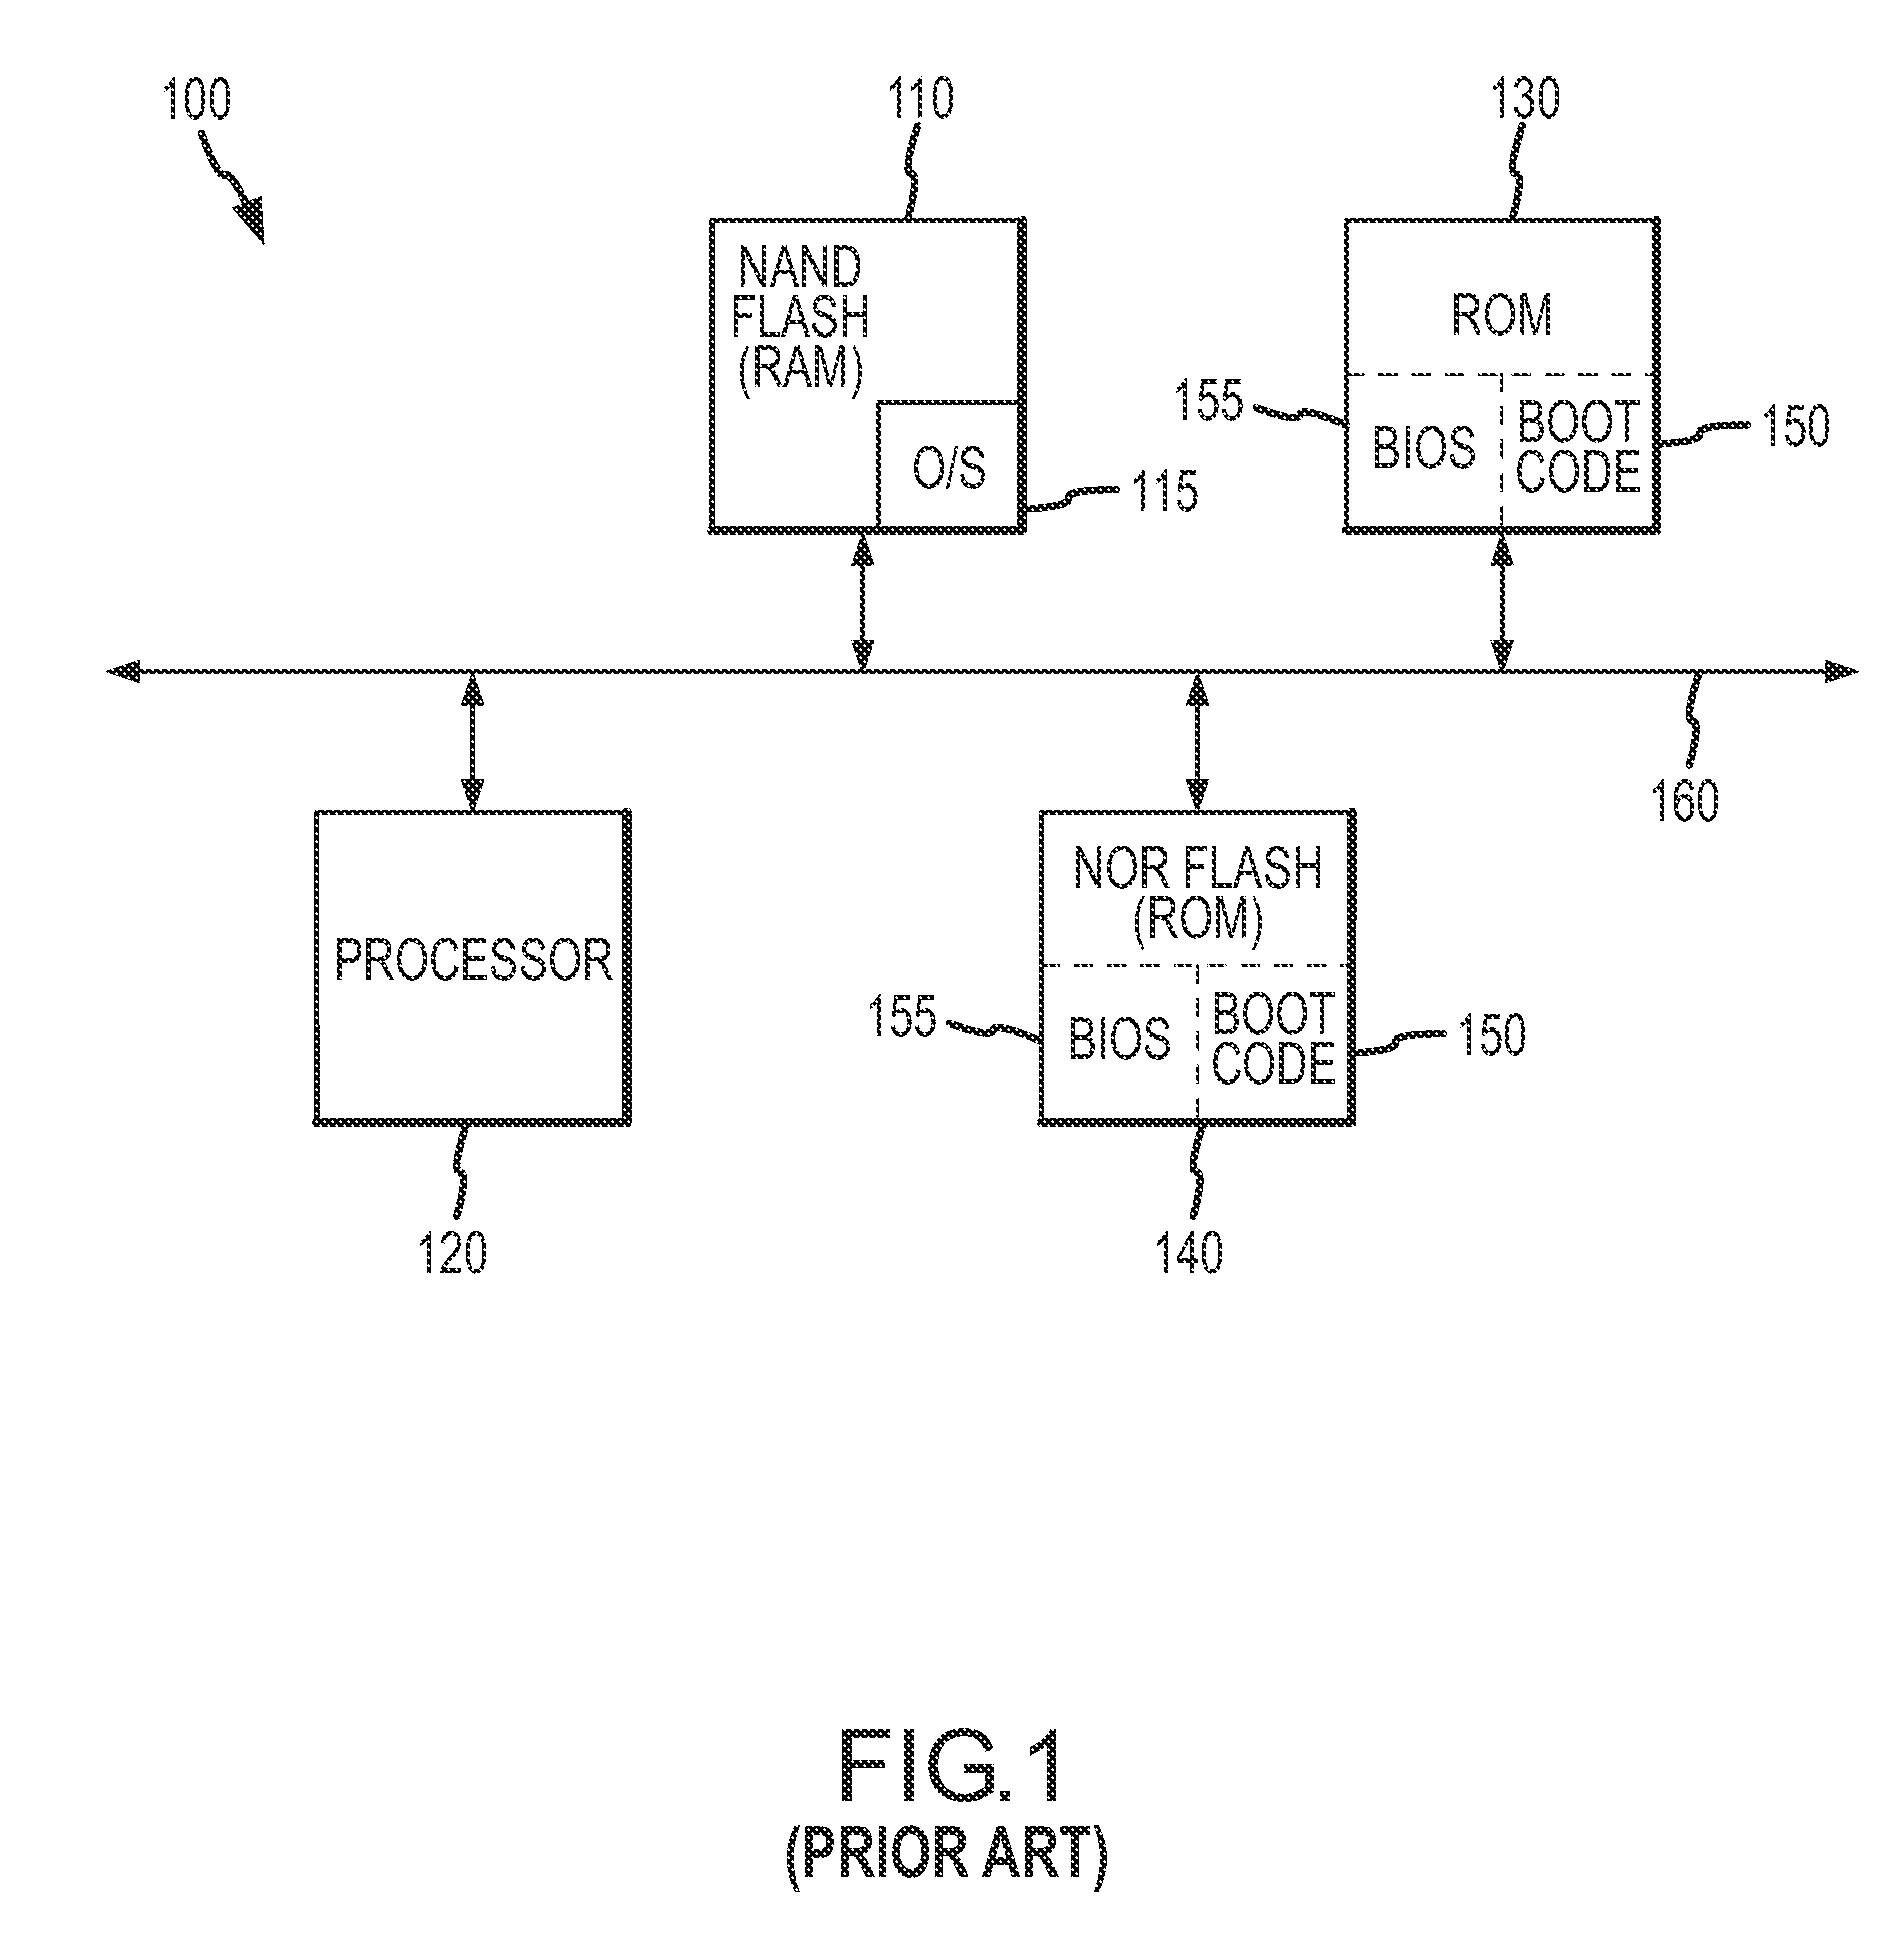 Apparatus and Method for Booting a Computing Device from a NAND Memory Device